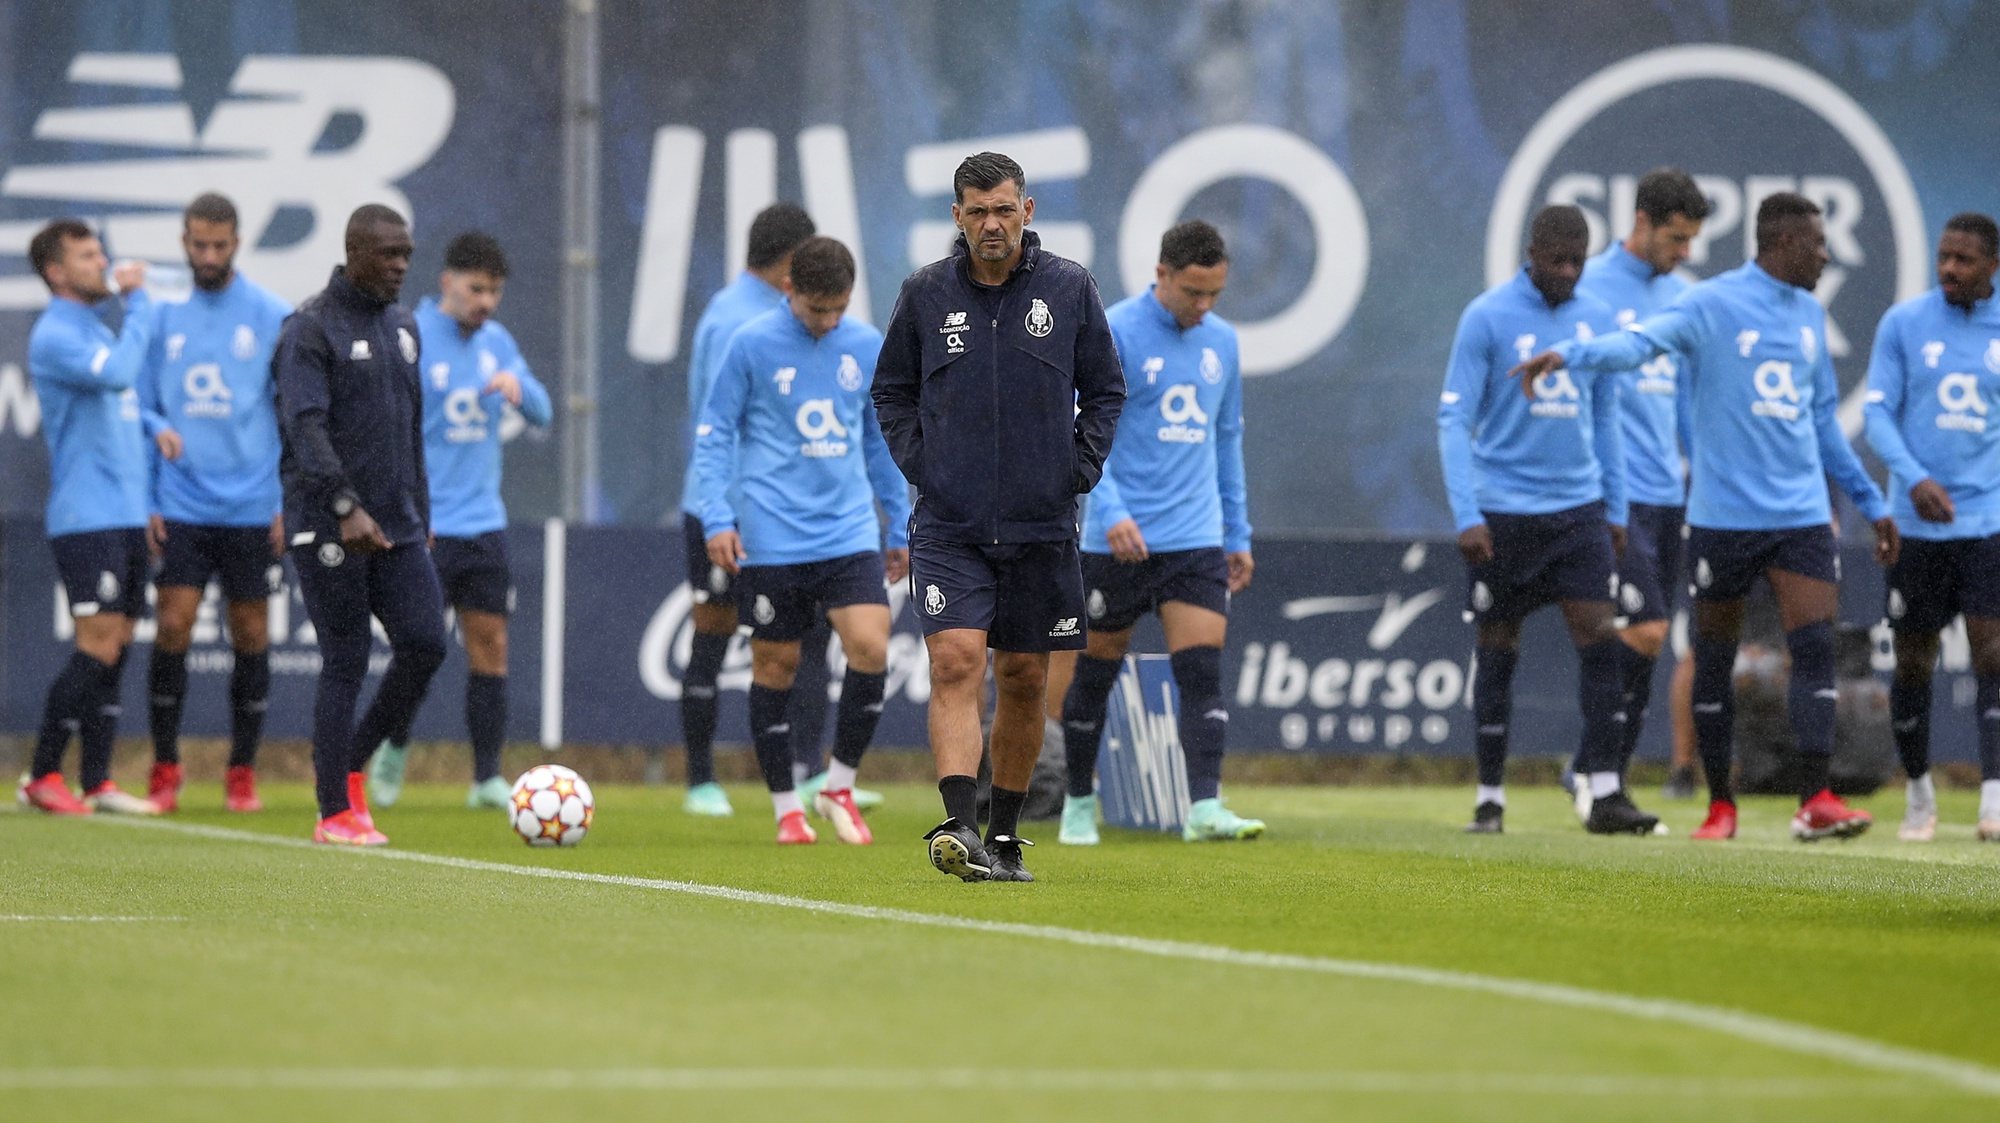 FC Porto&#039;s head coach Sergio Conceicao during his team training session at Olival training center, Vila Nova de Gaia, 27th September 2021. FC Porto will face Liverpool in their UEFA Champions L?eague group B stage soccer match on 28th September 2021.JOSE COELHO/LUSA